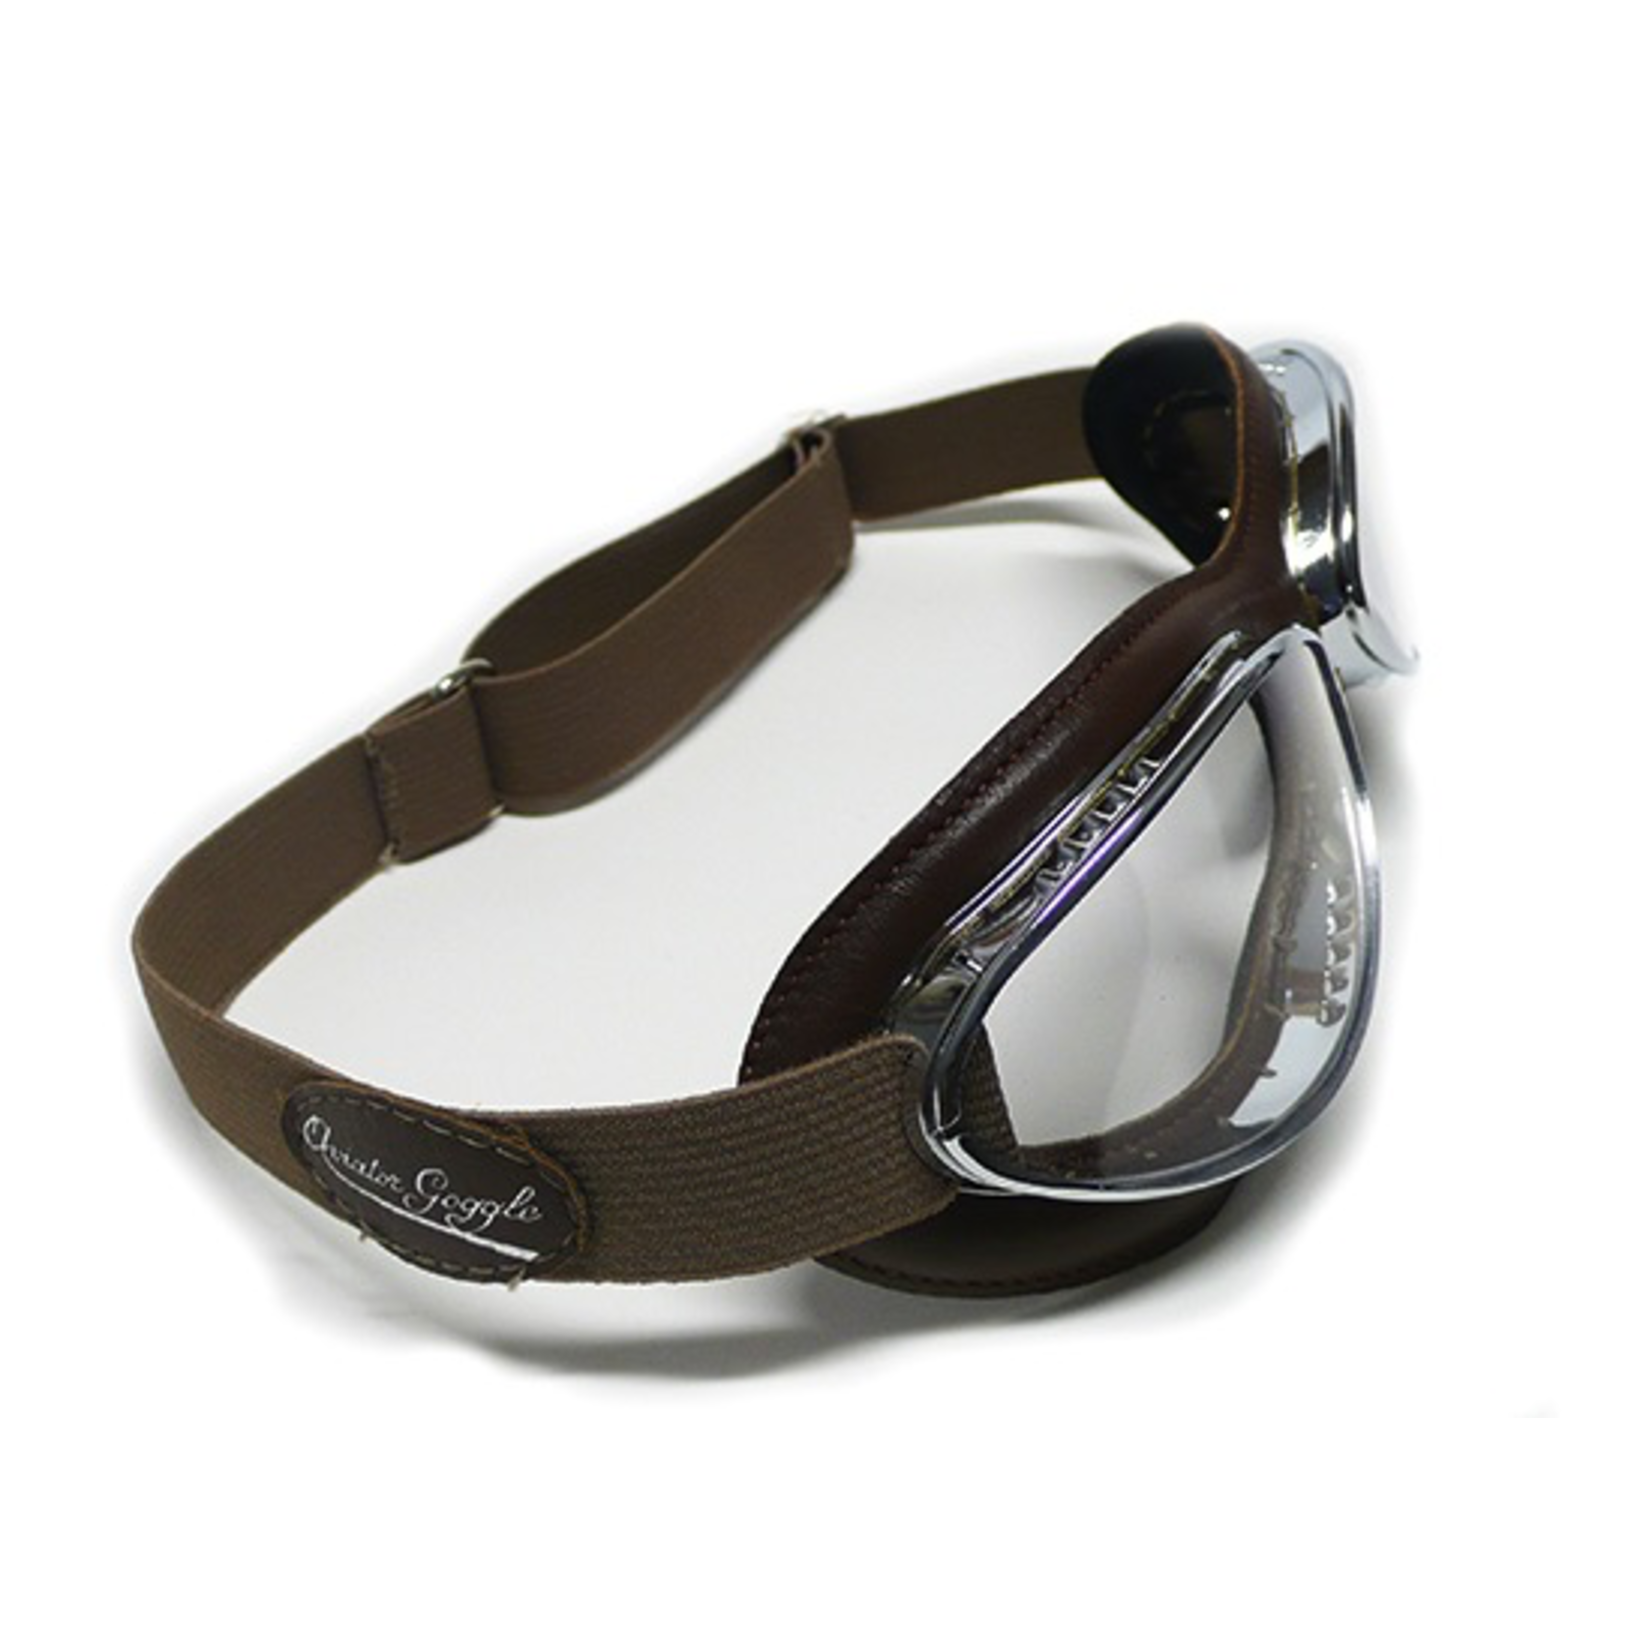 Apparel Goggles, Aviator Chrome Brown Leather (France)